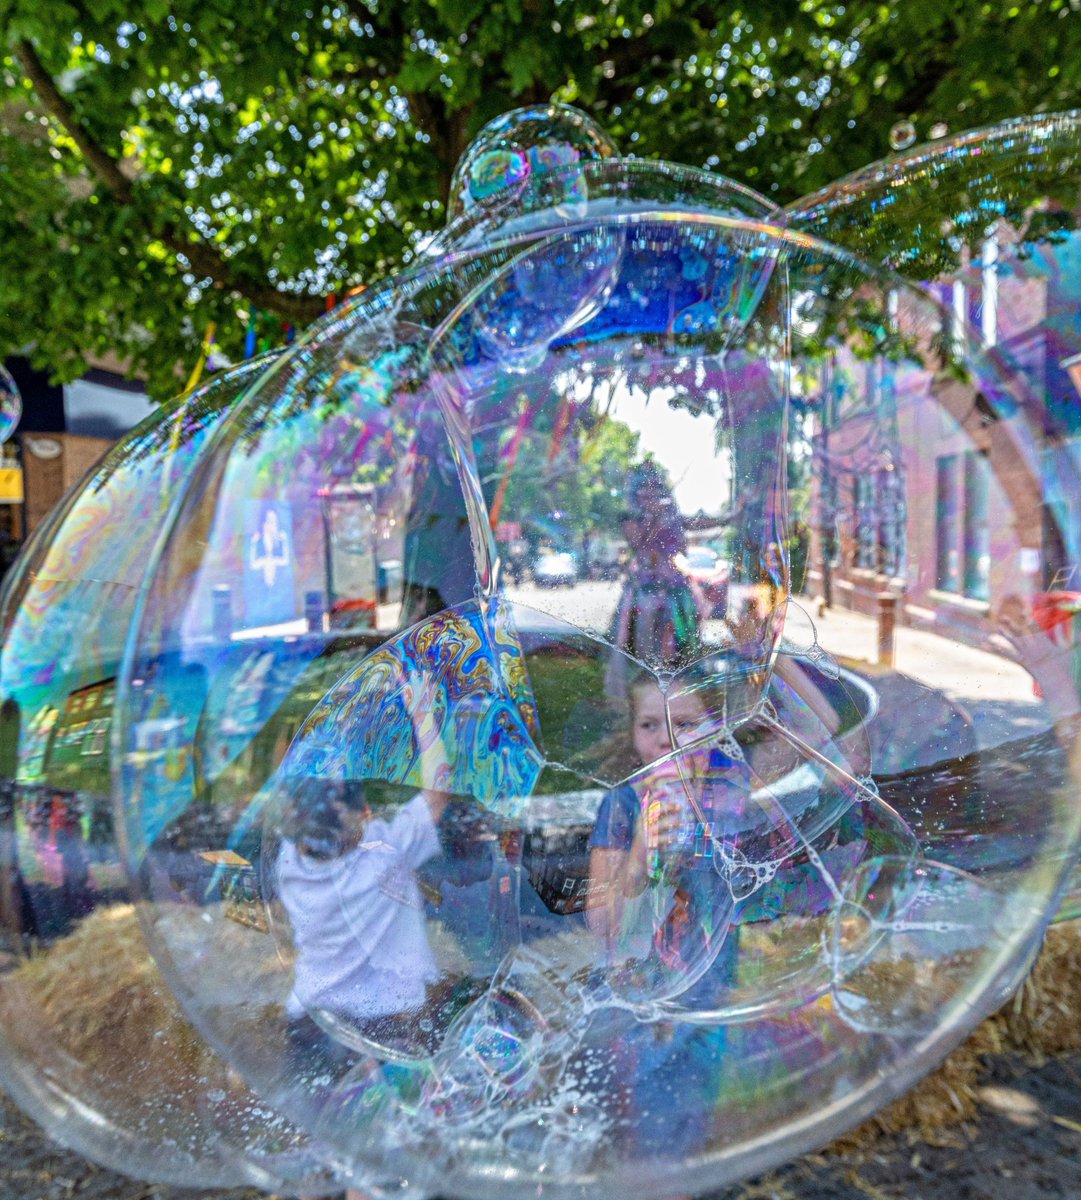 Have a bubbletastic time in #Prescot at the #ElizabethanFayre There’s nothing better than chasing bubbles – you can even have a go of making your own. 📅 Saturday 8 June ⏰ 11am – 5pm Find out what else is happening orlo.uk/BxYT3